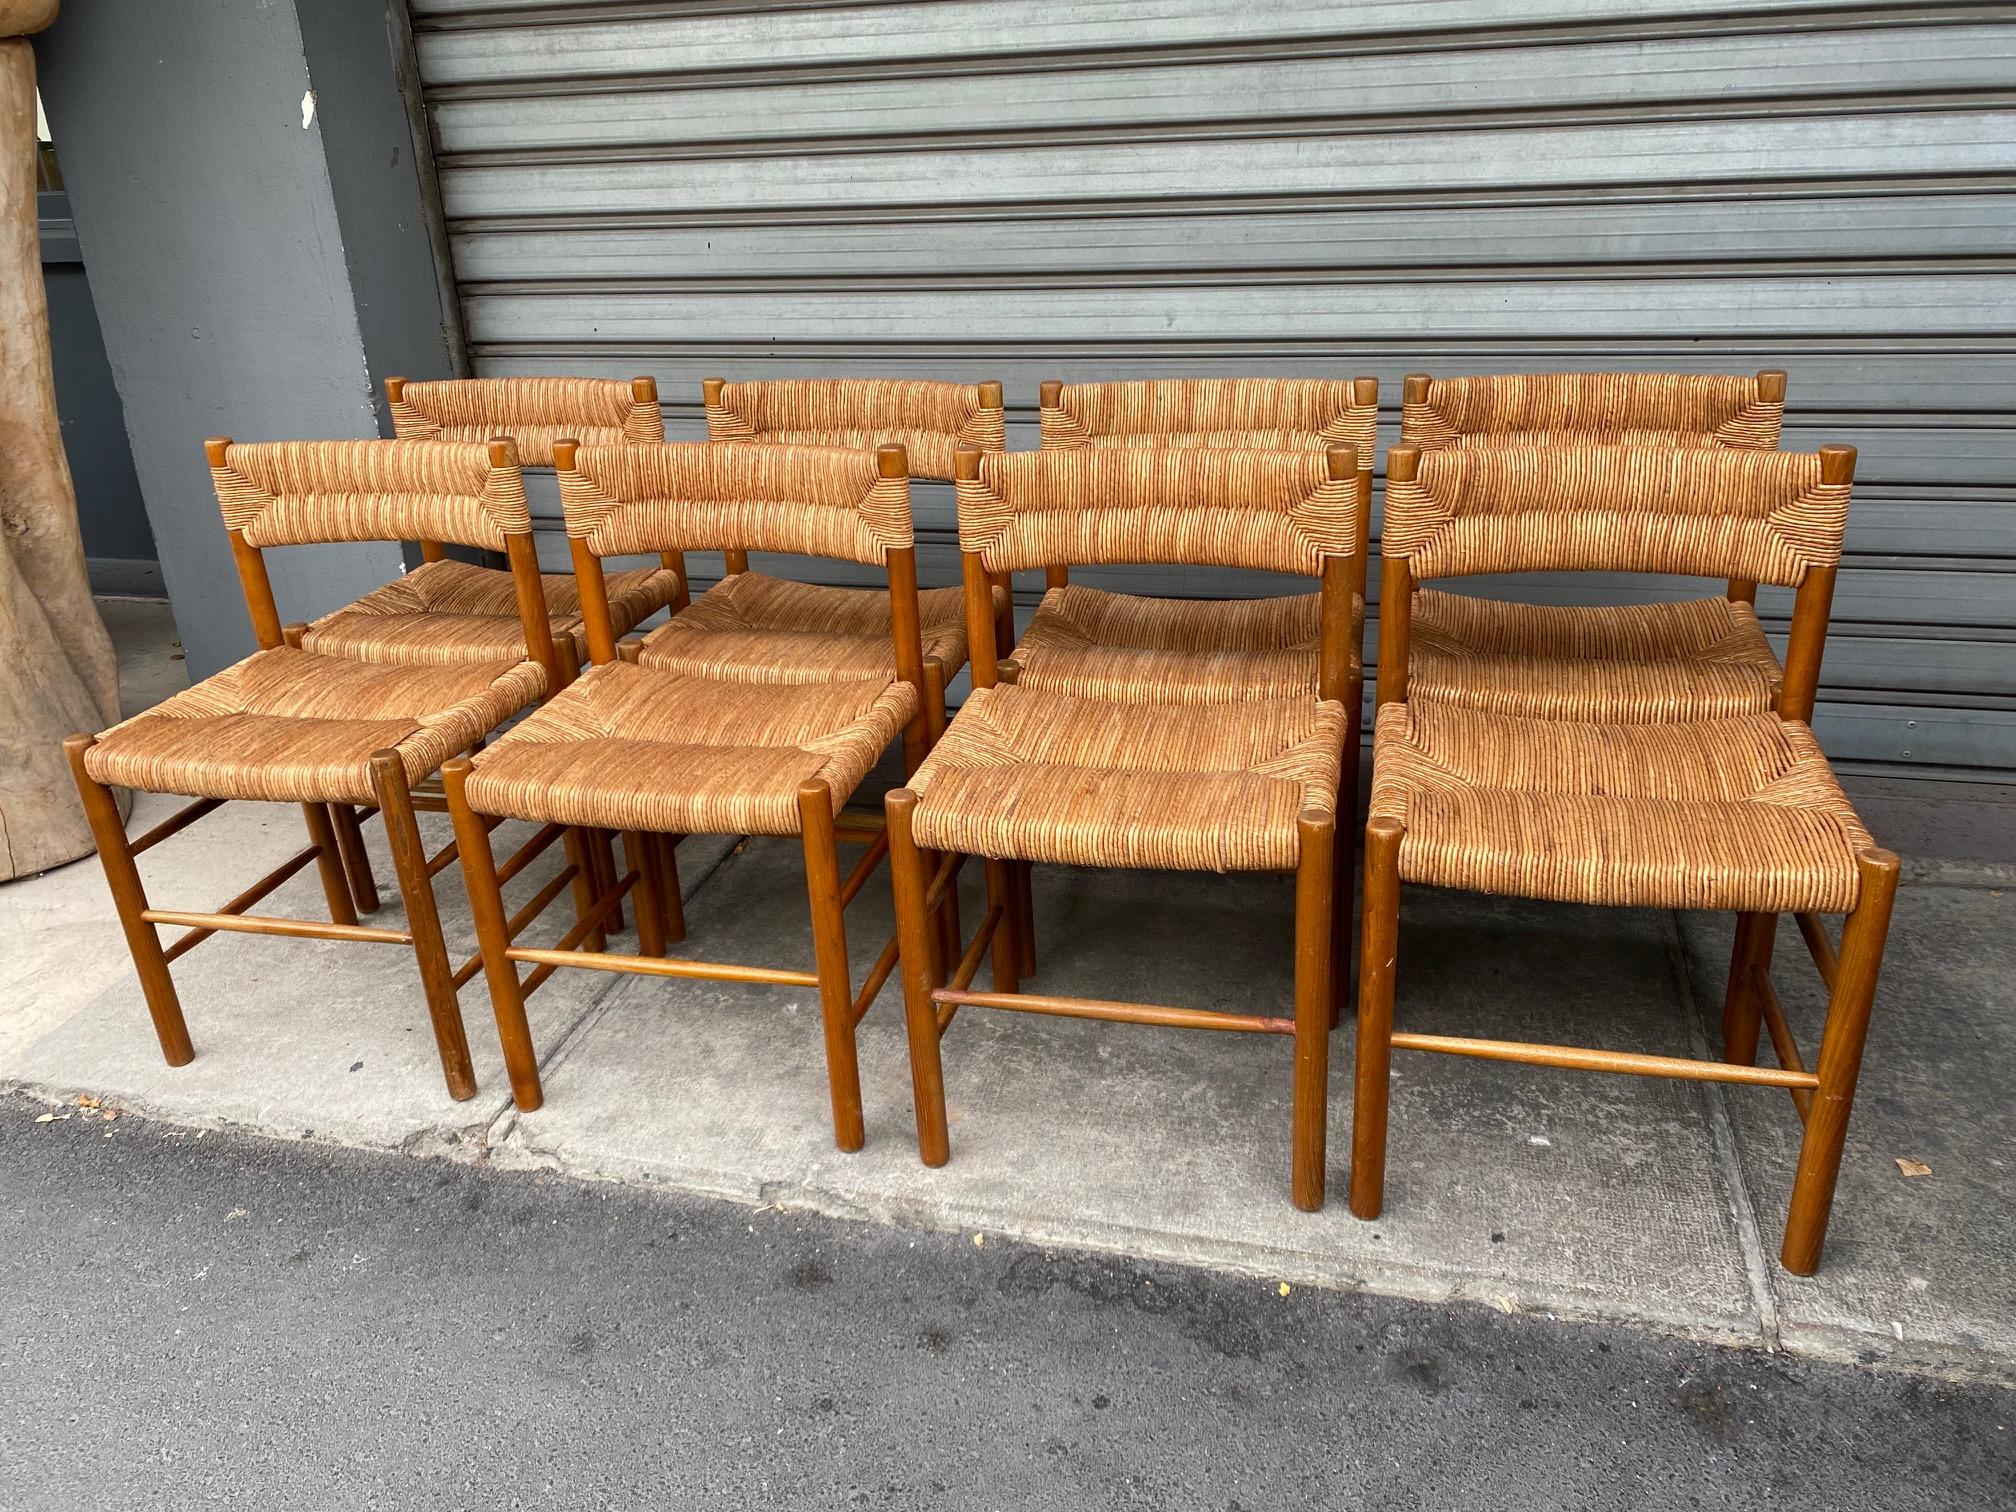 French Set of 8 Dordogne chairs by Charlotte Perriand, France, 1960s For Sale